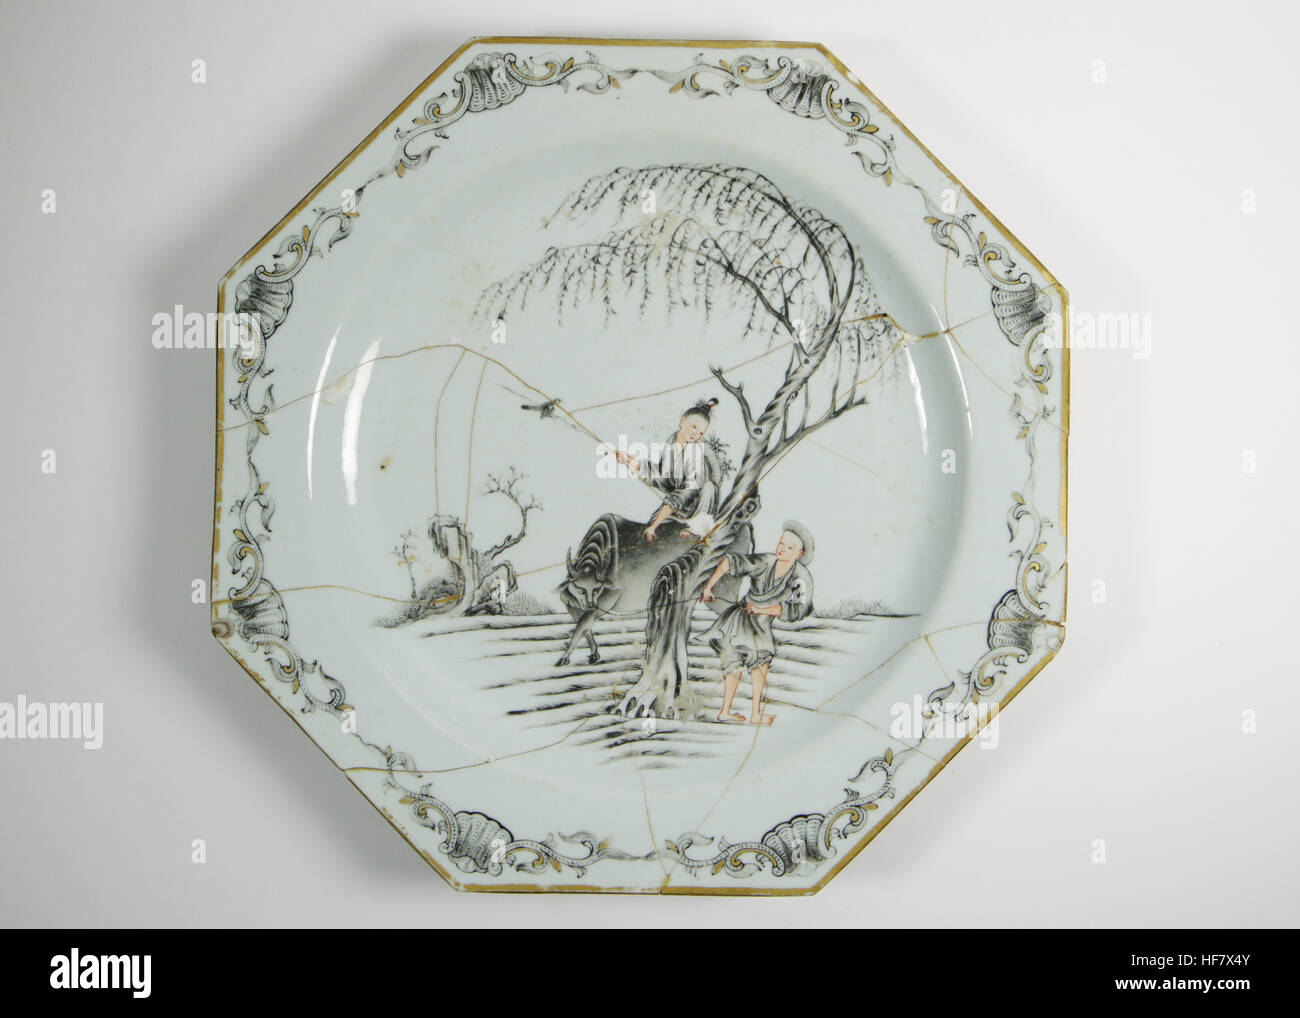 Antique 18th. Chinese large octagonal plate, painted en grisaille with a girl riding a buffalo and a boy beneath a tree. The large plate measures 35cm Stock Photo